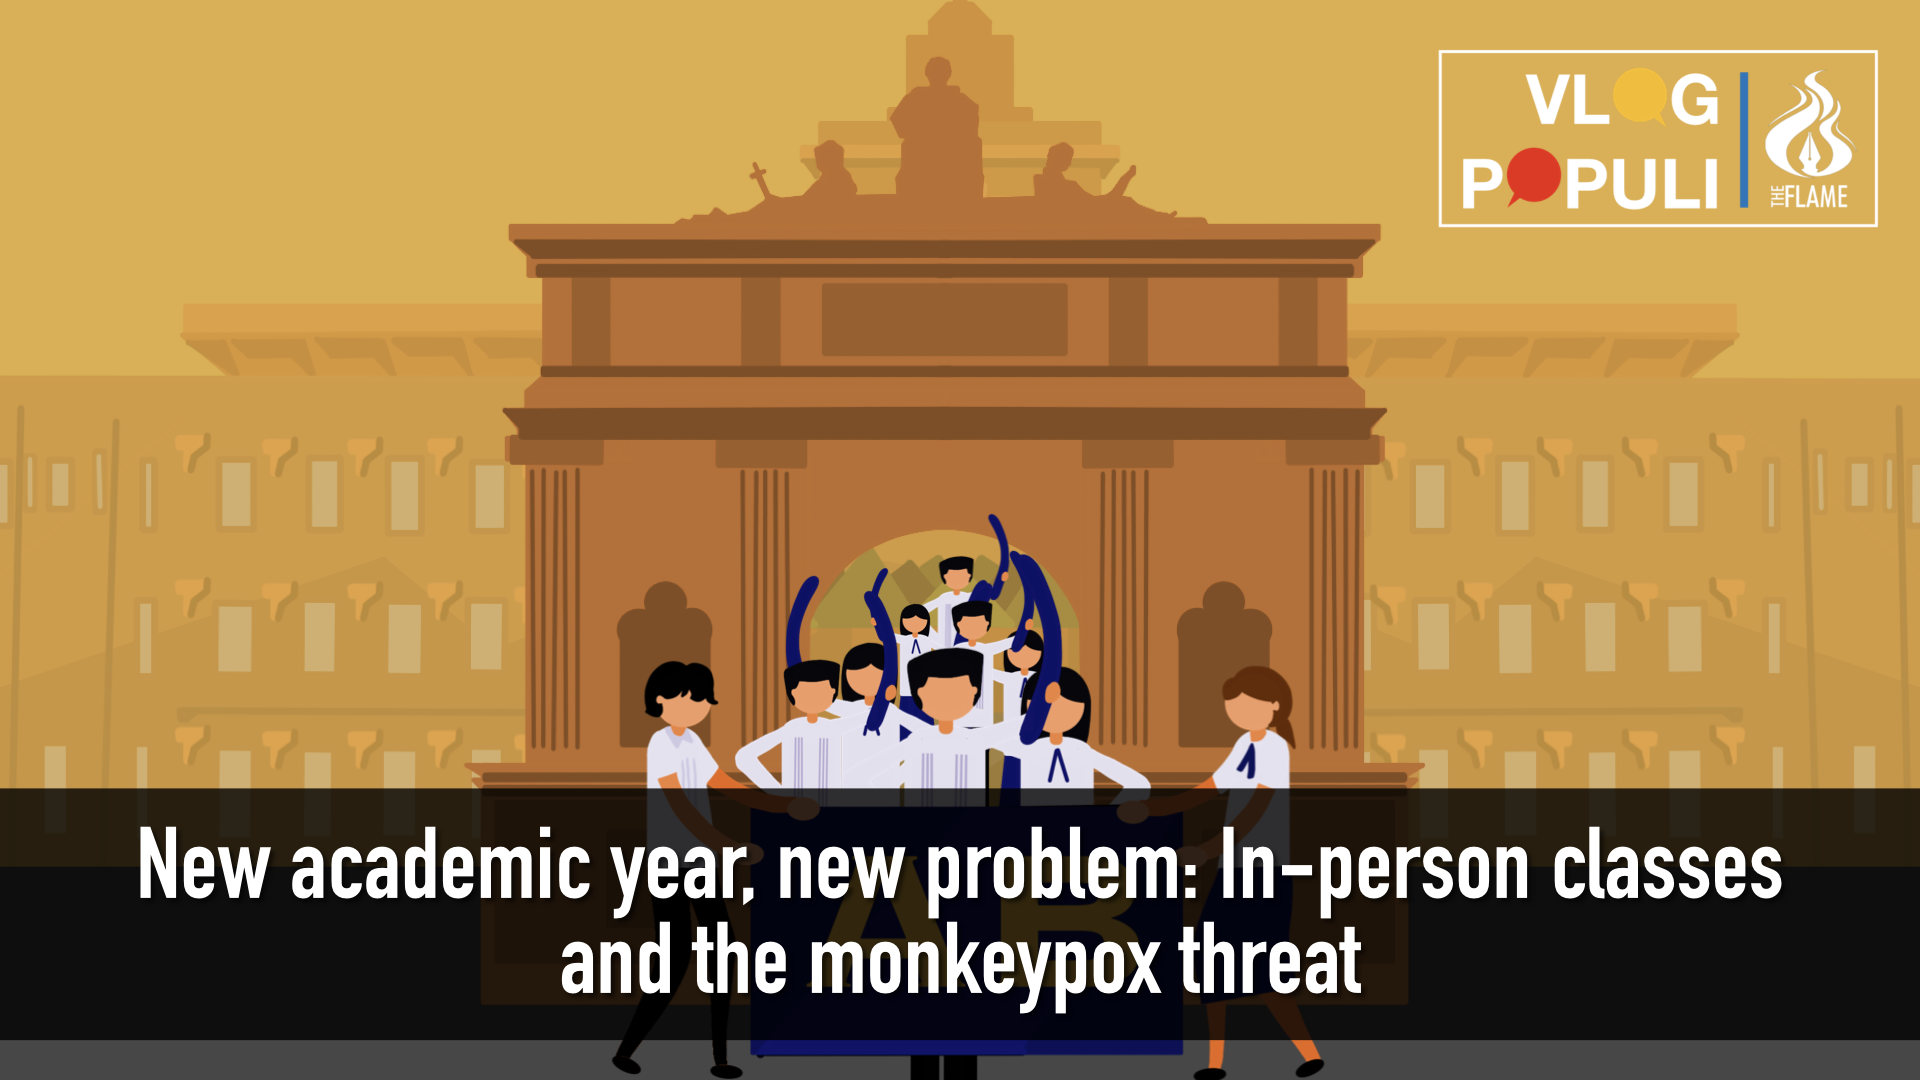 VLOG POPULI: New academic year, new problem: In-person classes and the monkeypox threat